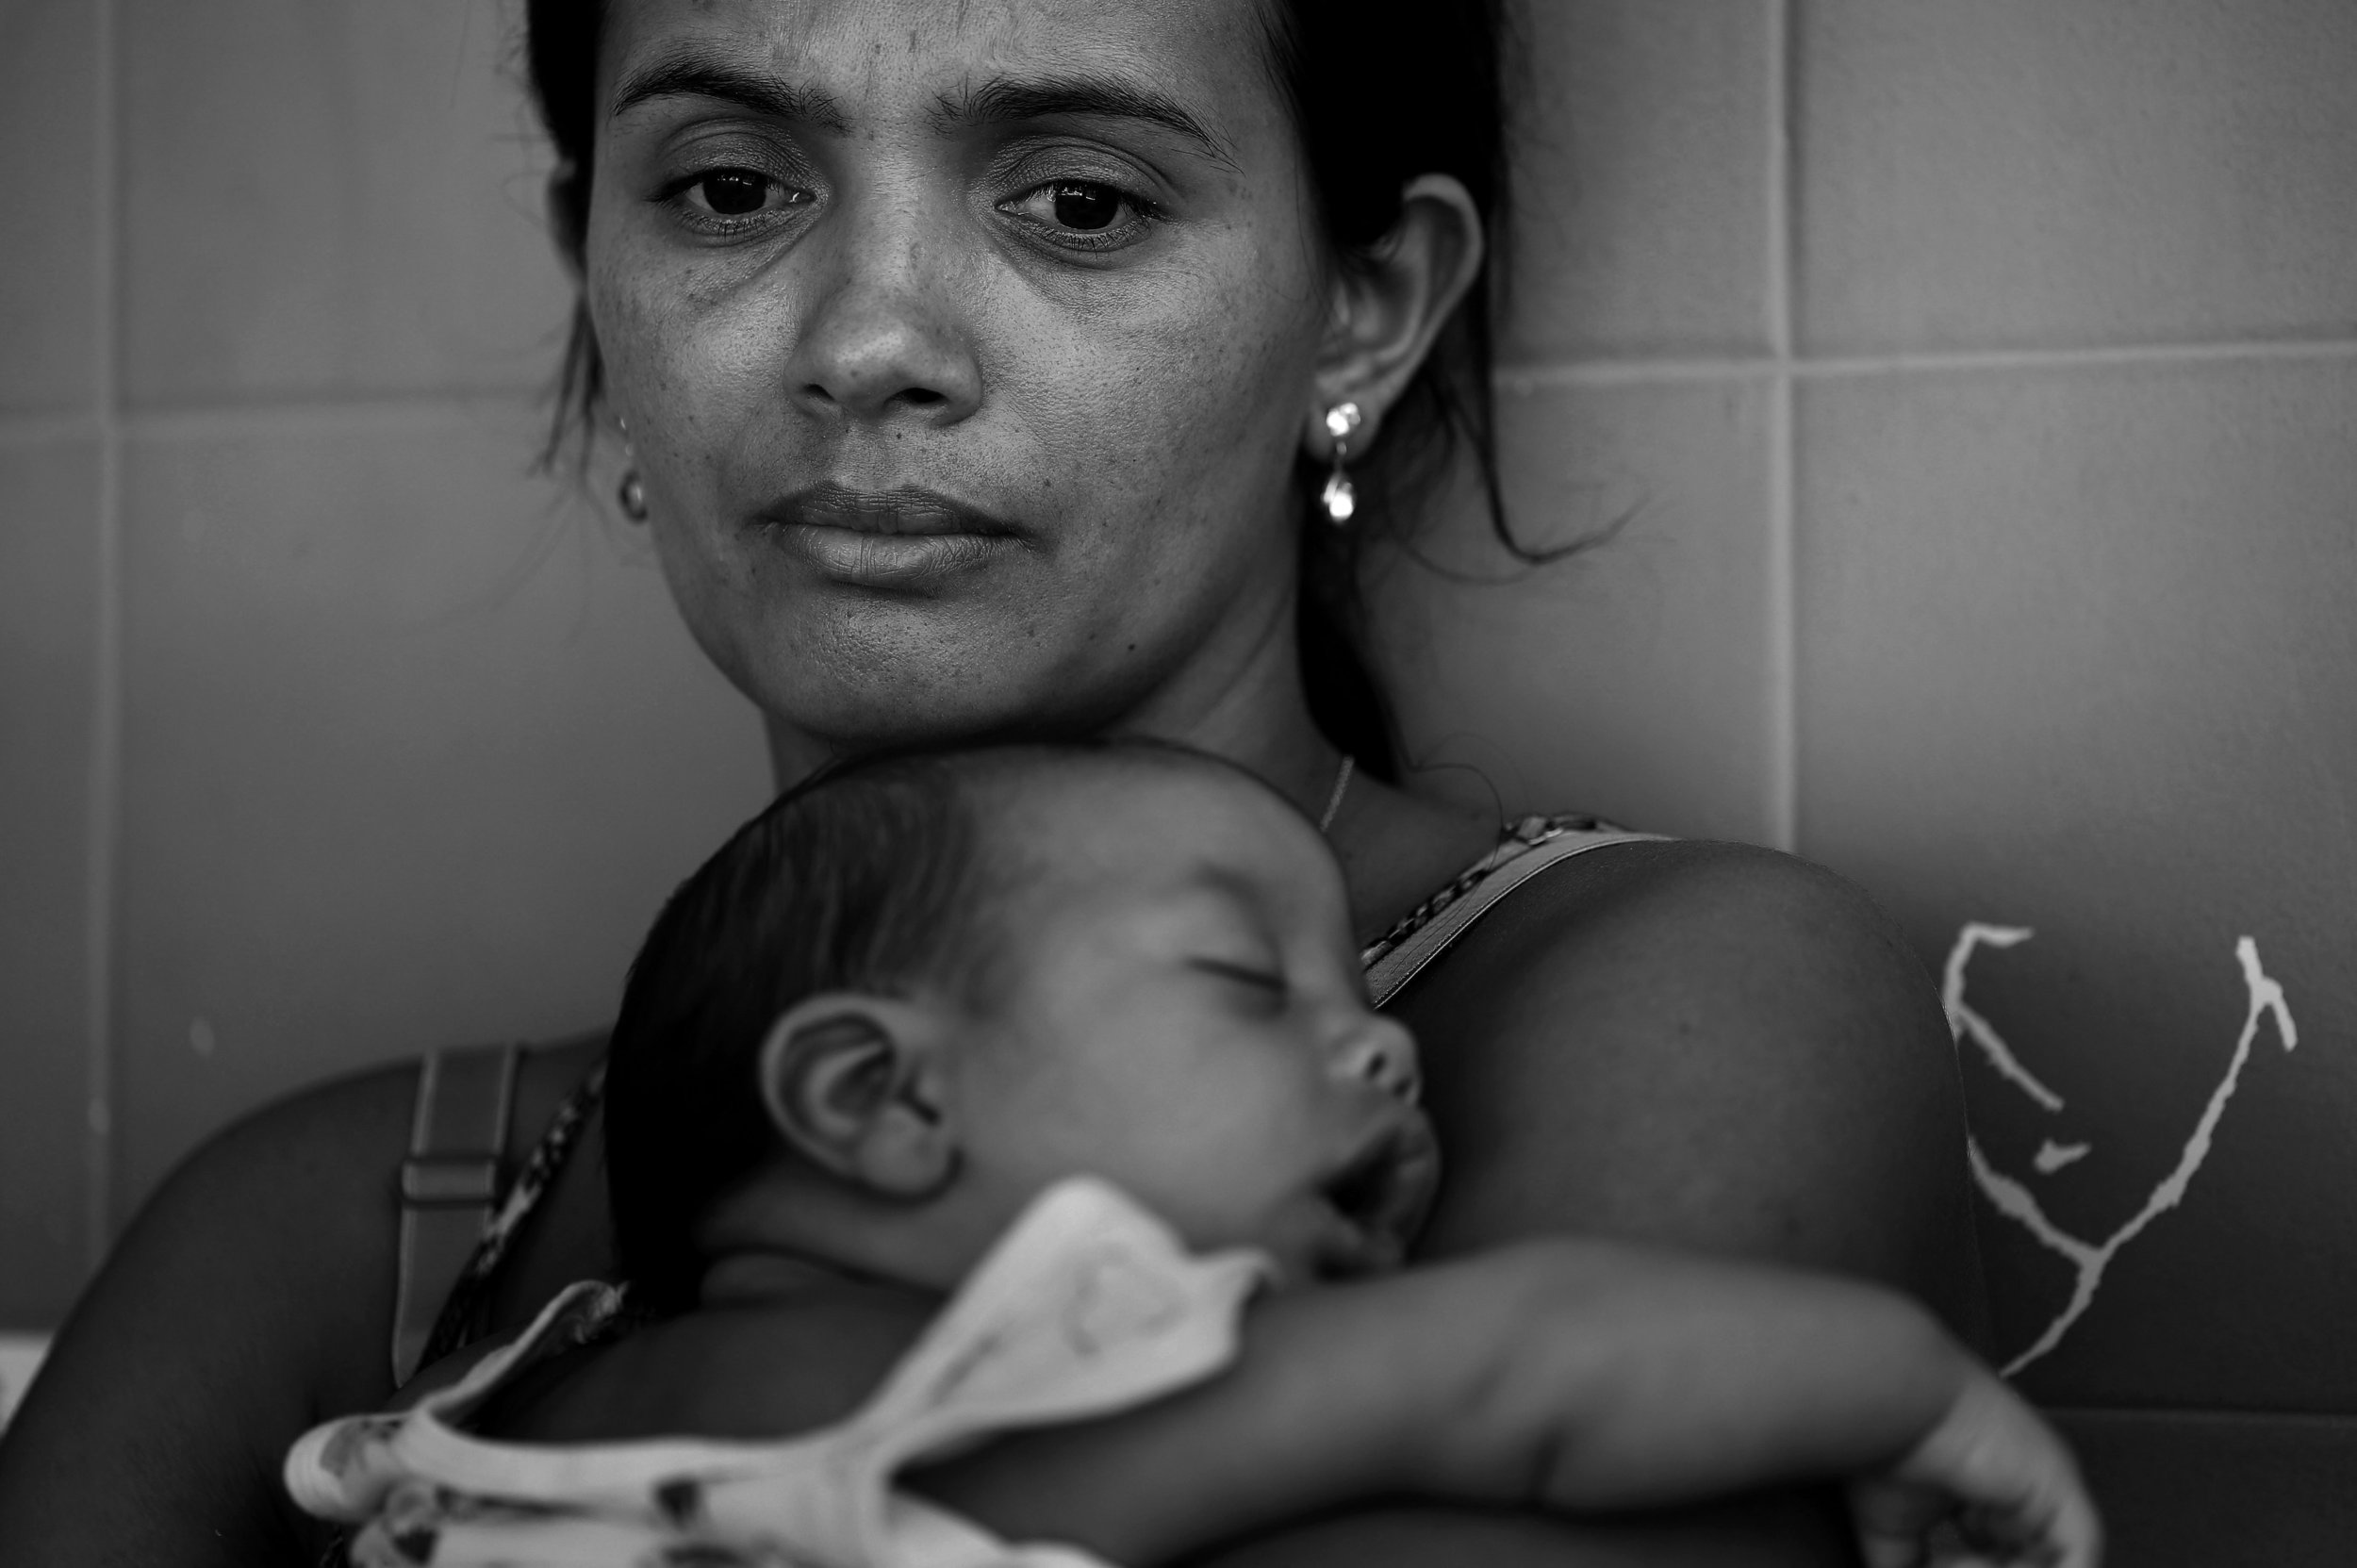  After receiving the news that her son has microcephaly, Francinelma Santos, age 29, holds Jhin Pirlo, 2 months, as she waits for a car to drive them home from the hospital. Because her son has a larger head than most babies with microcephaly, Franci